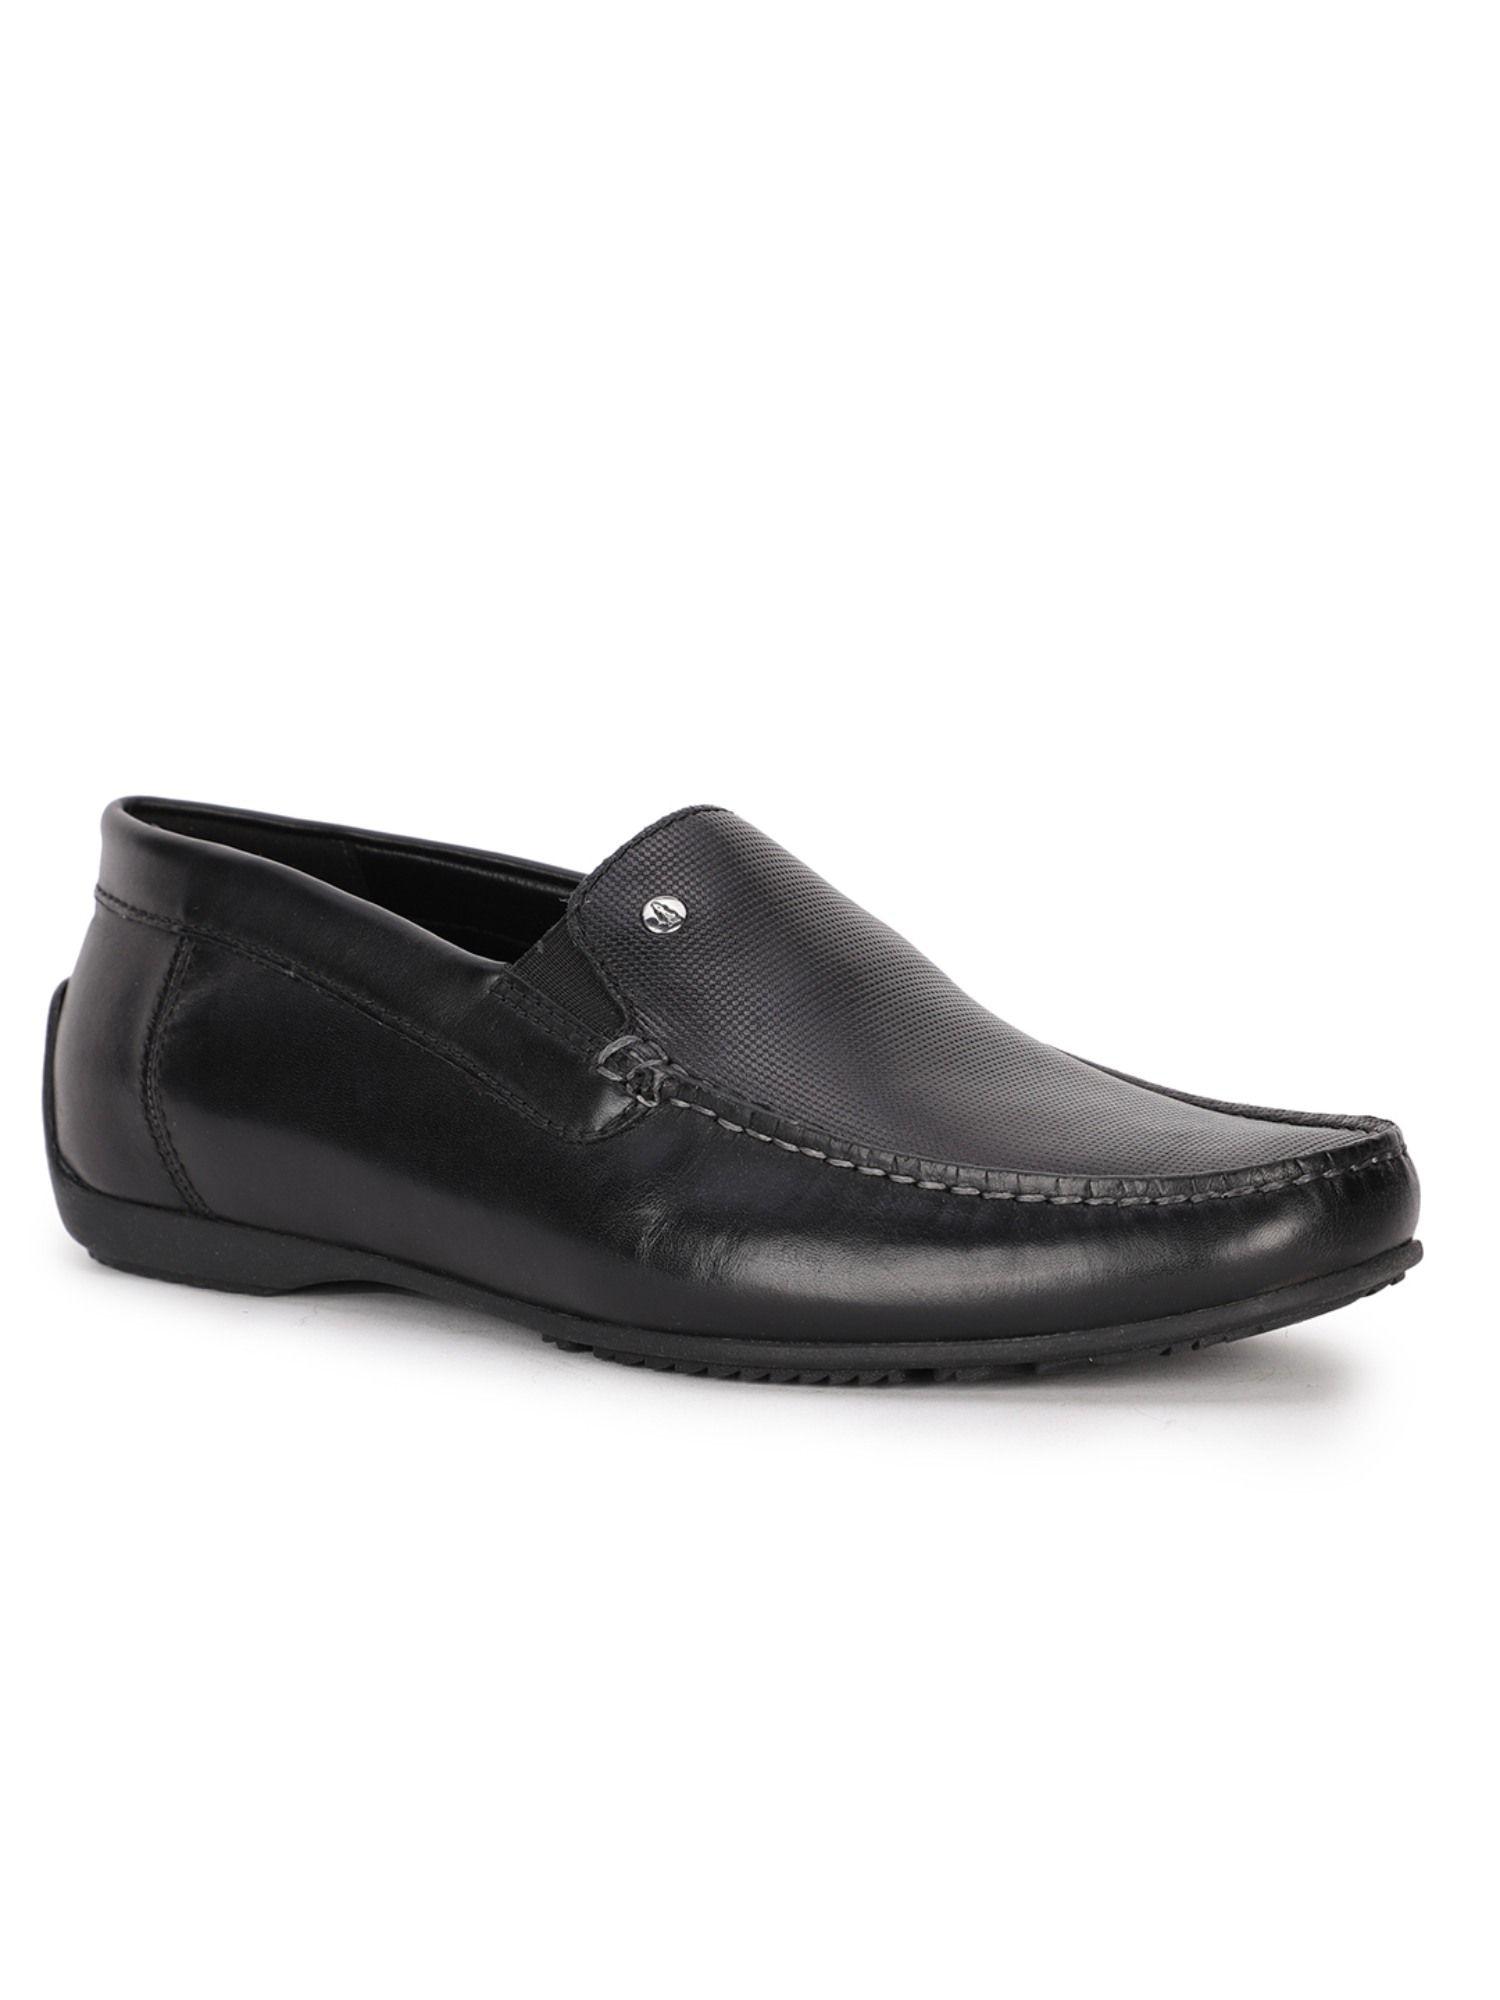 black-casual-shoes-for-men